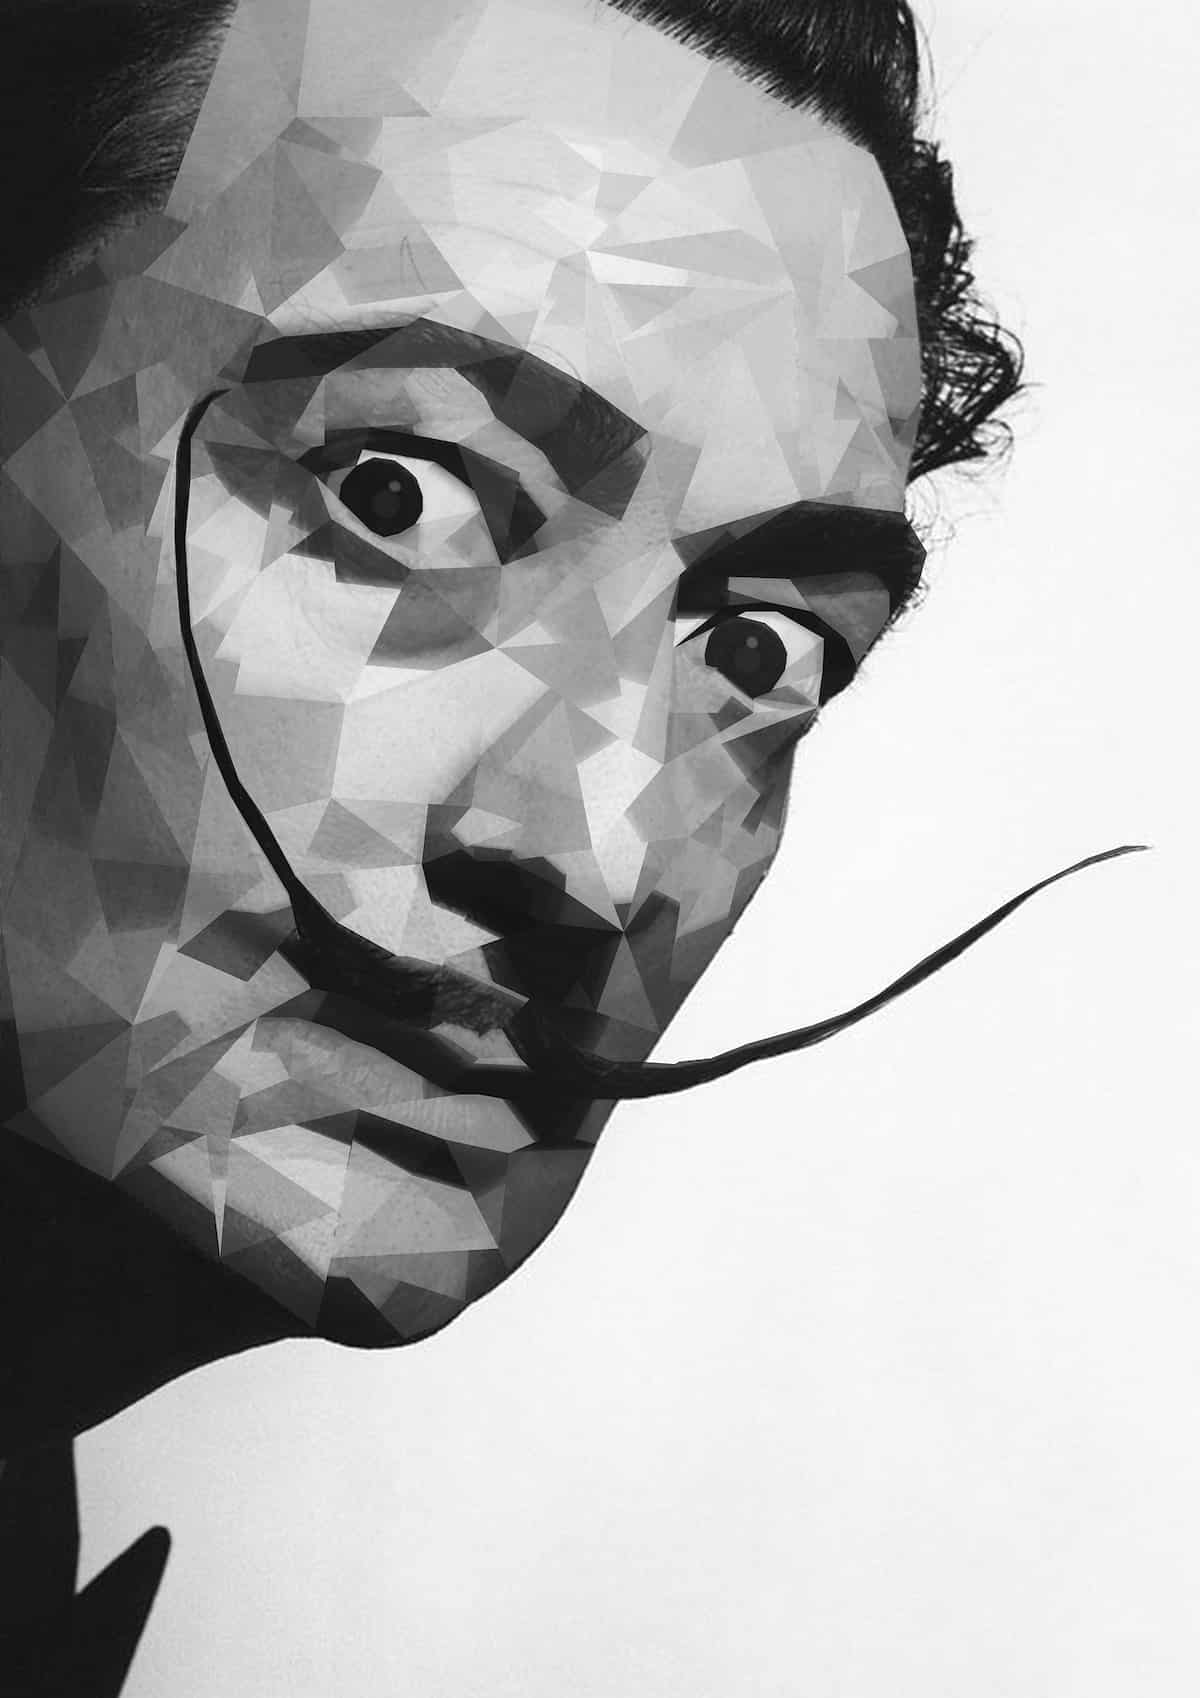 Famous Salvador Dali paintings with descriptions [updated 2020]